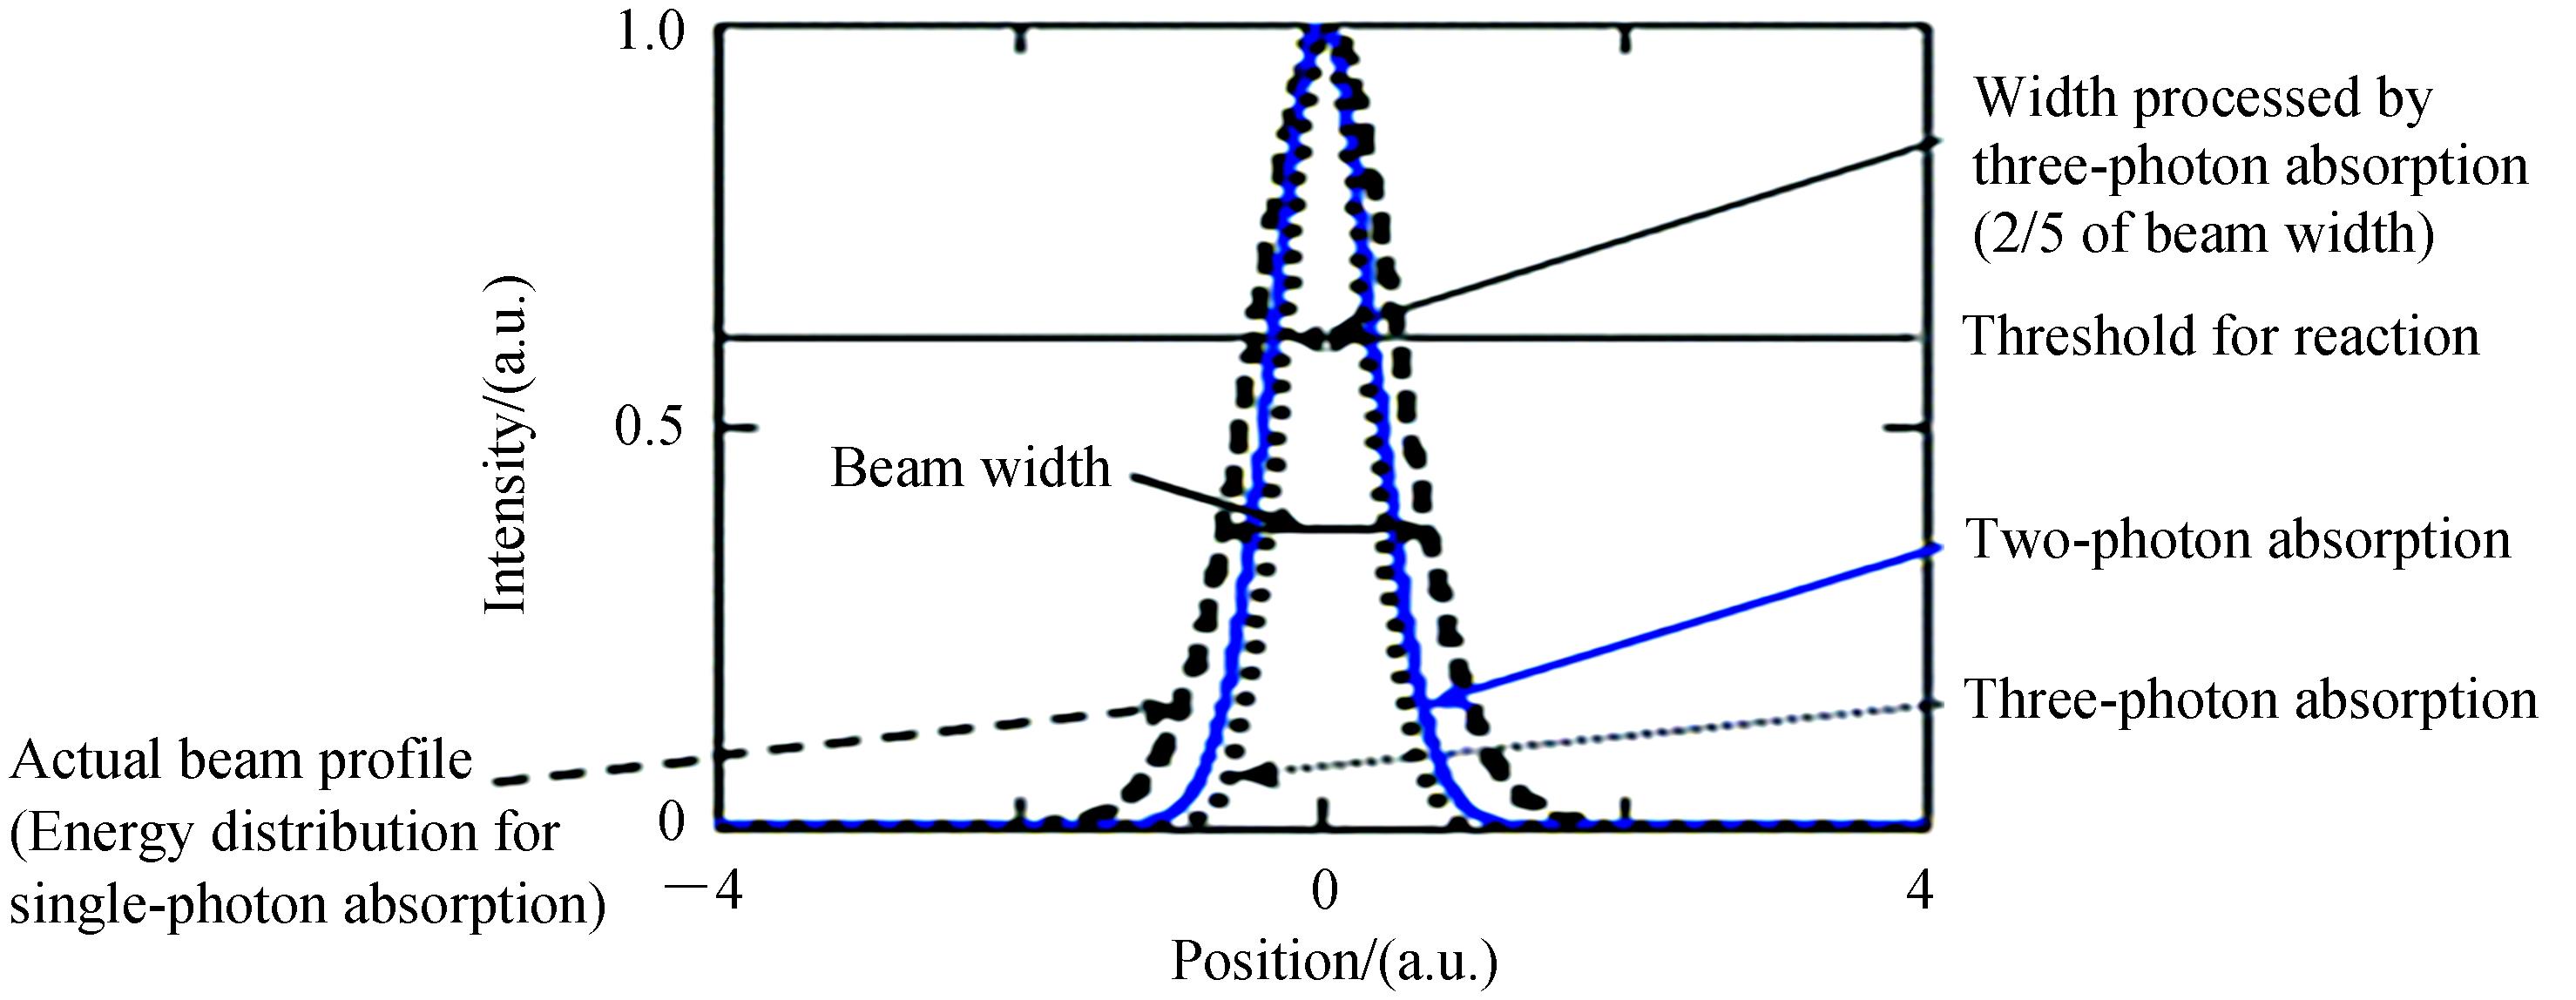 Actual beam profileand spatial distributions of laser energy absorbed by transparent materials through two and three photon absorption[38]